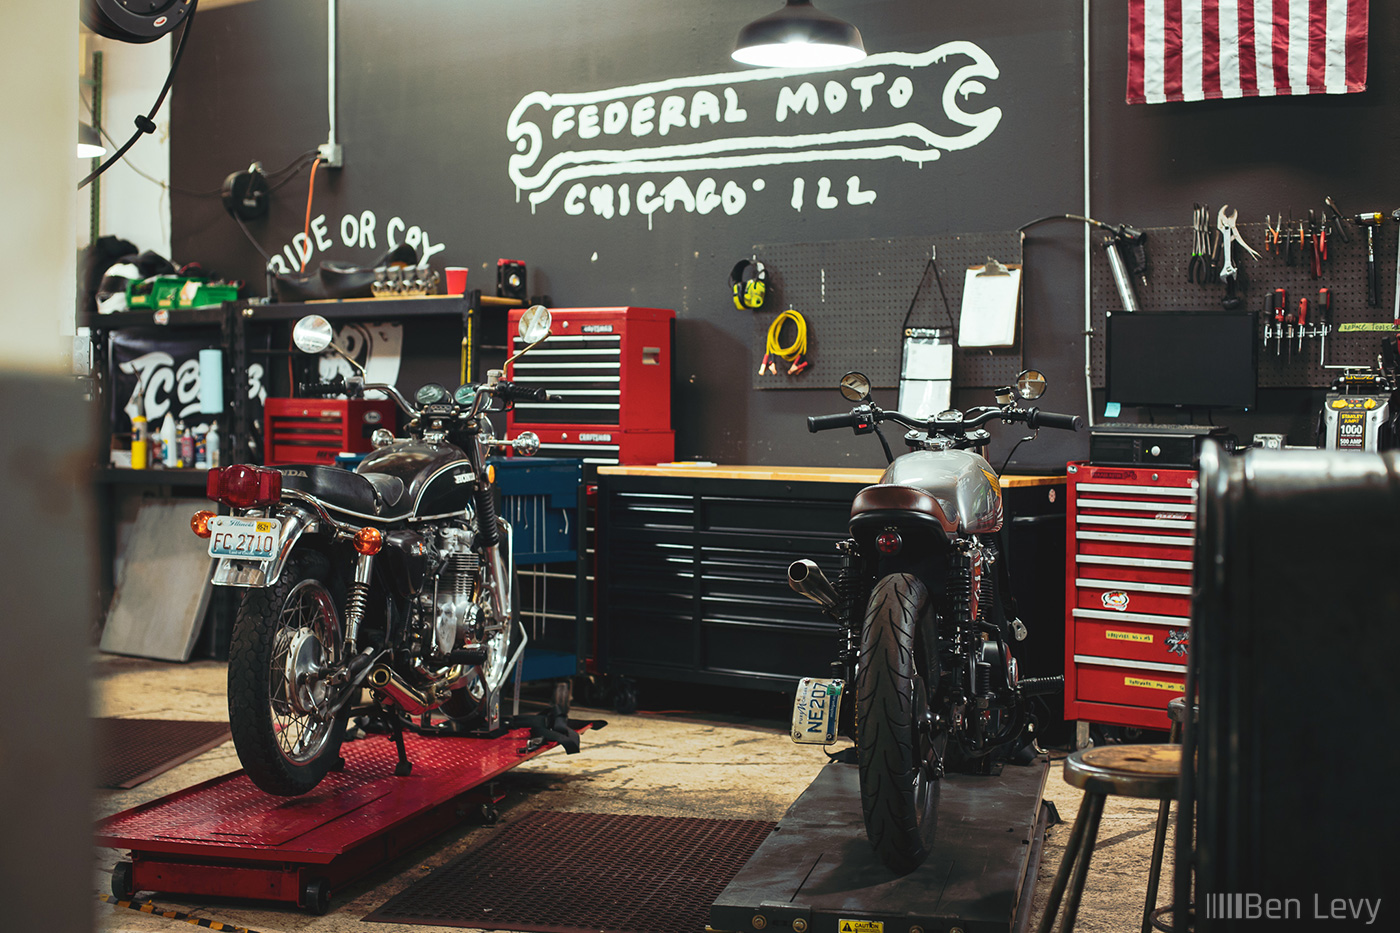 The Federal Moto workshop in 2021